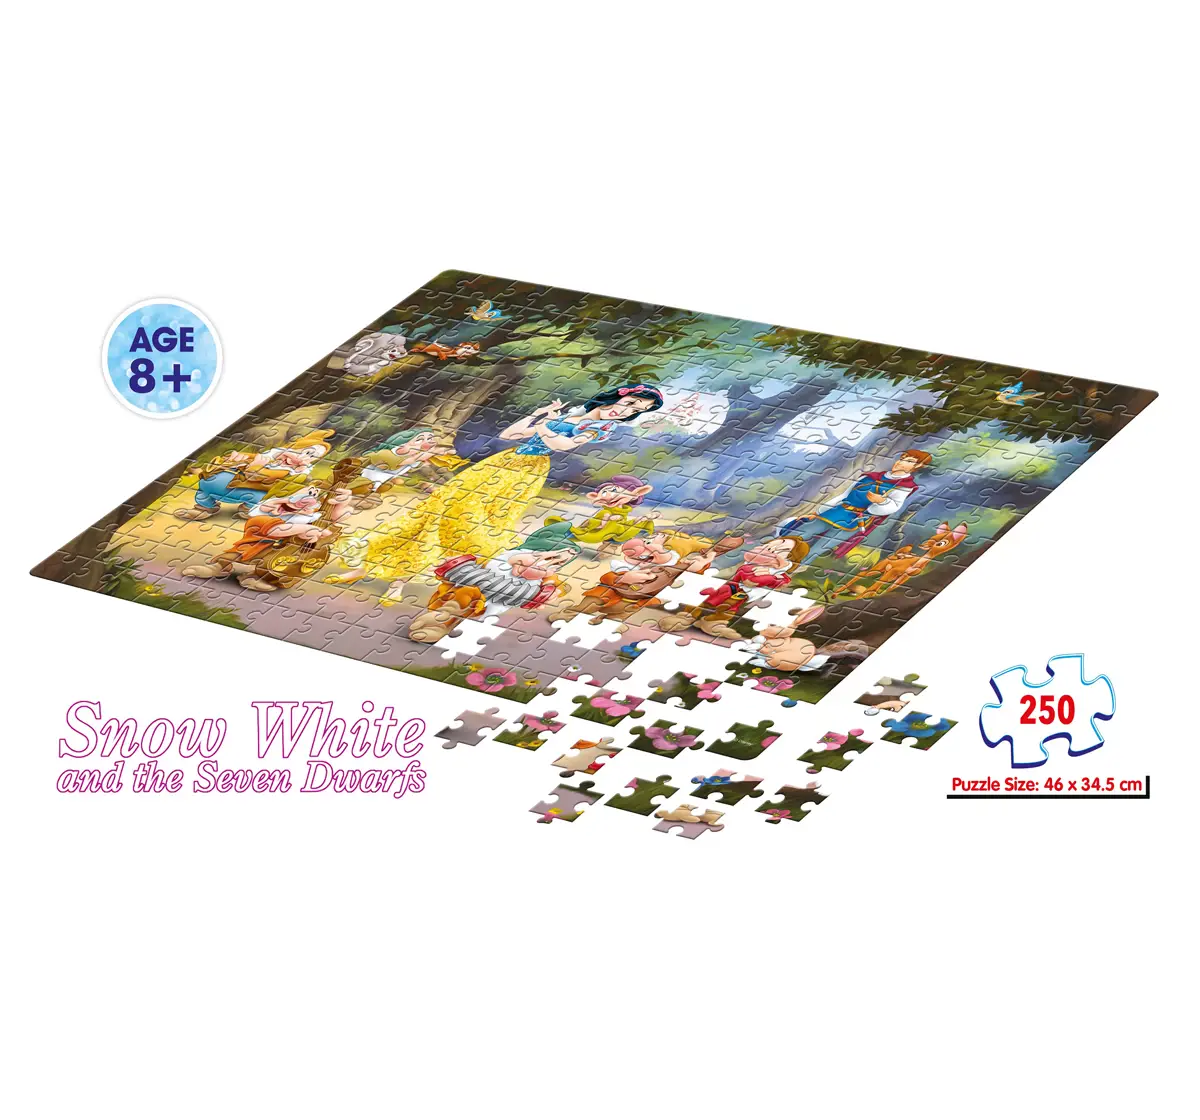 Frank Snow White and The Seven Dwarfs Floor Puzzles Multicolor 8Y+